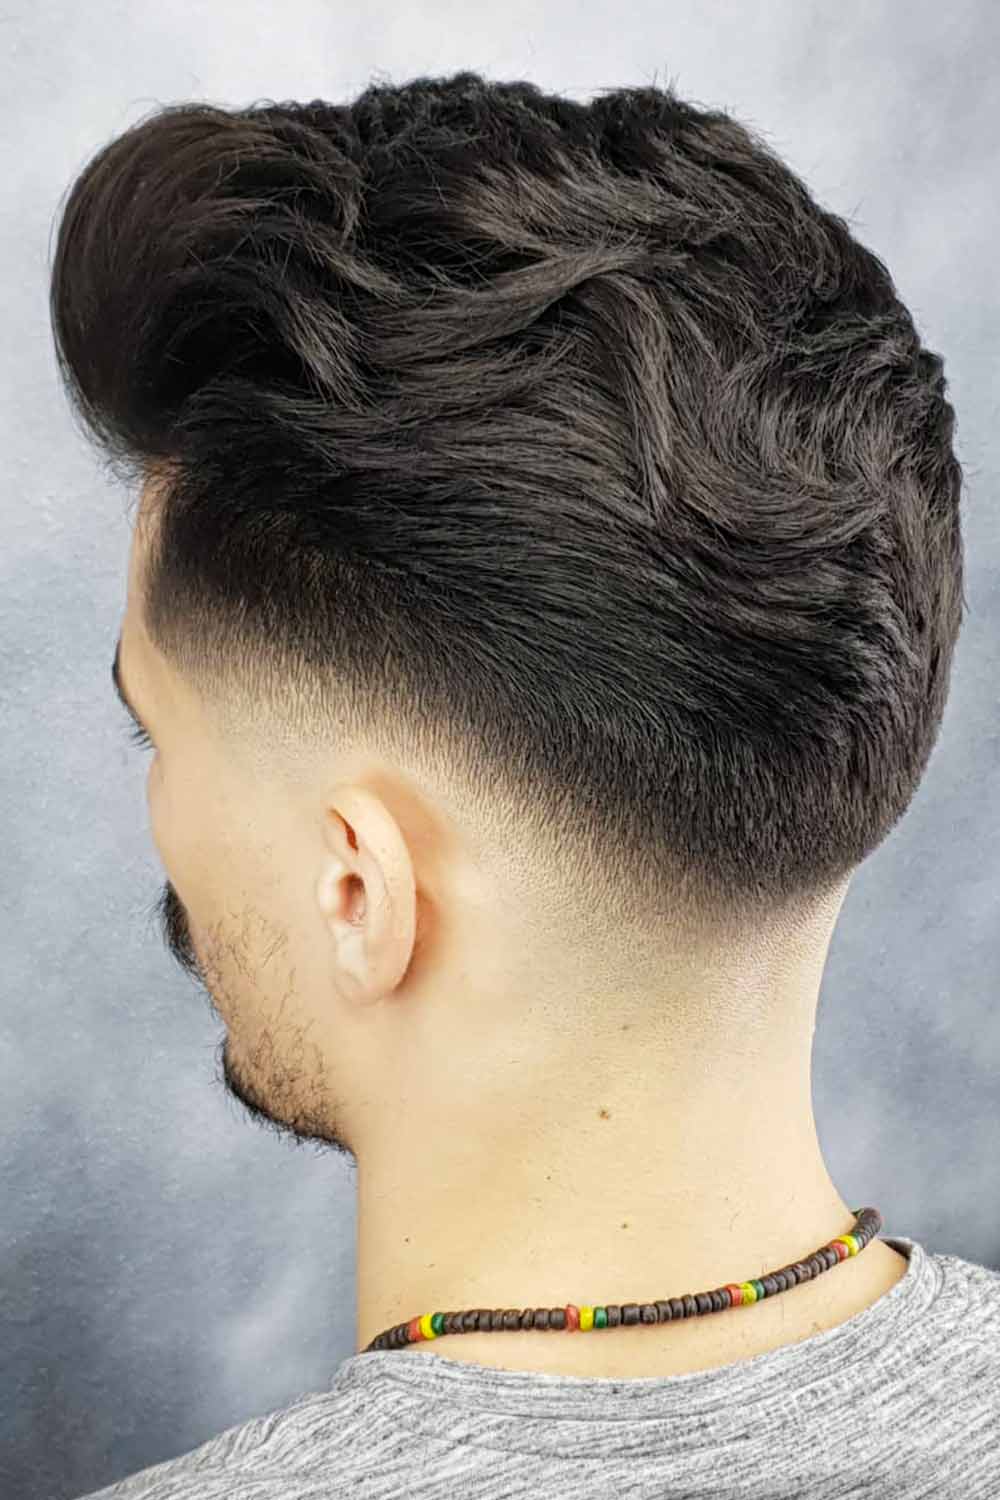 Taper Fade Comb Over No Line Style #comboverfade #combover #fade